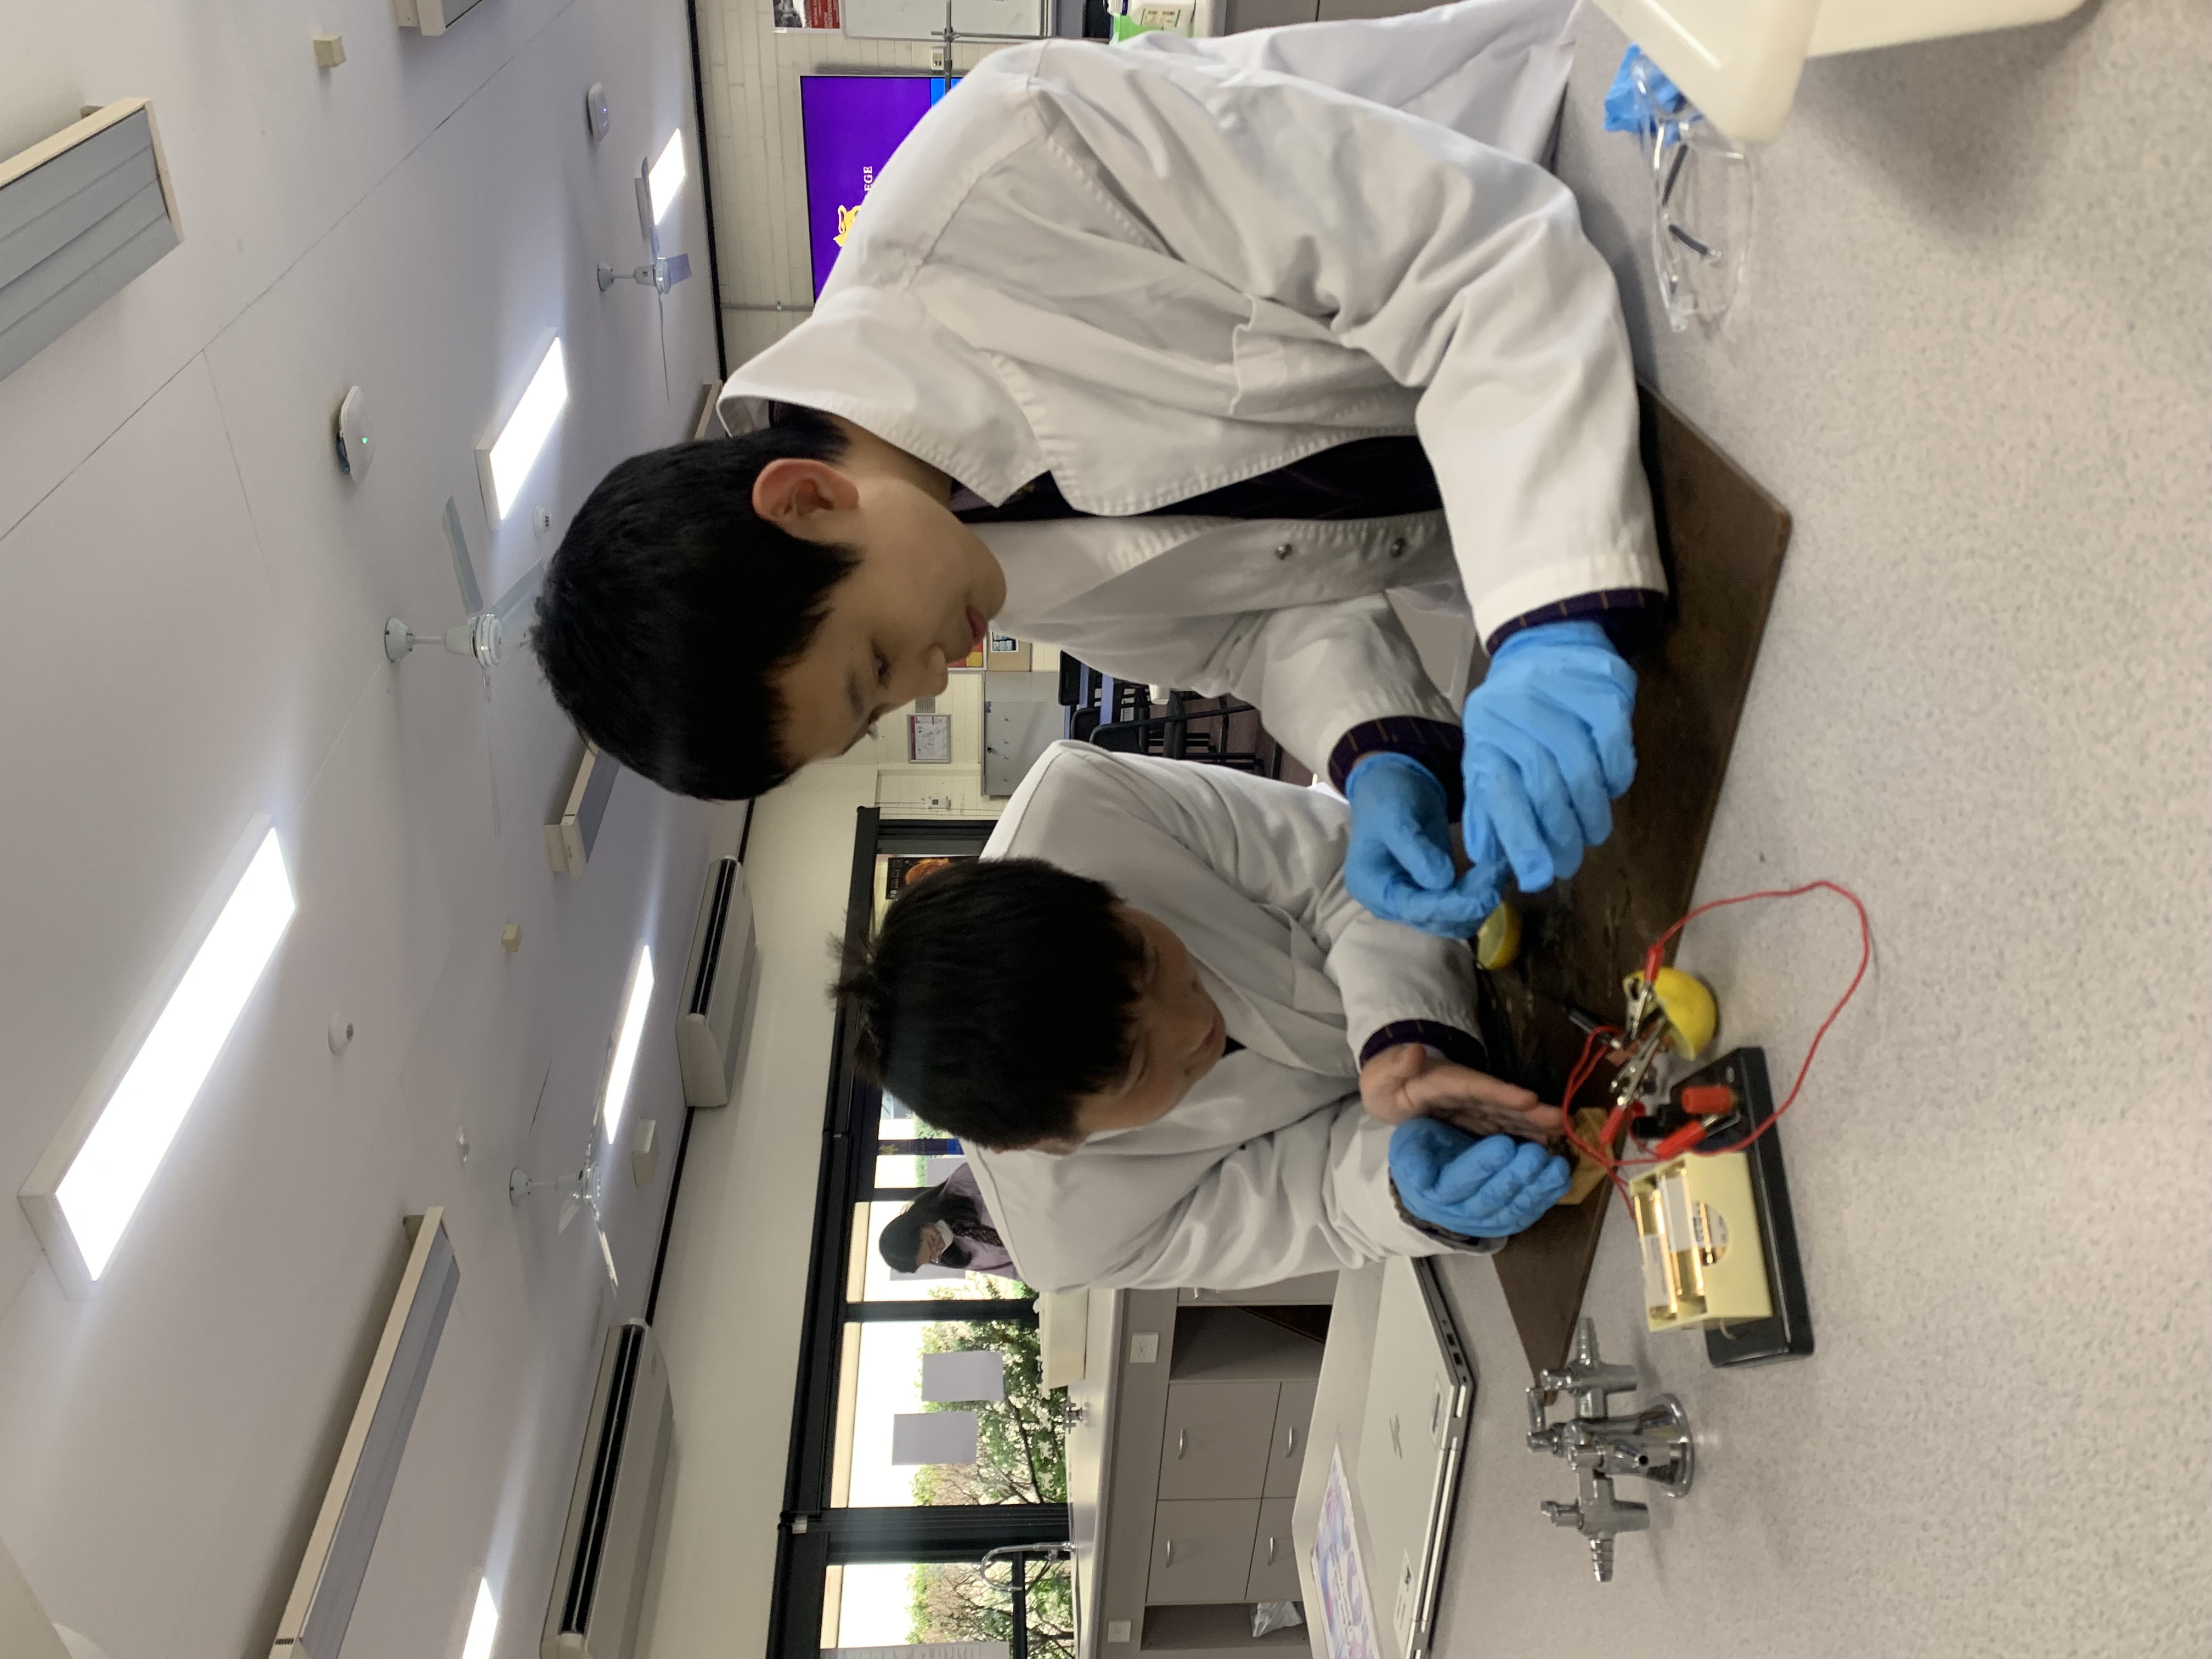 Two students in lab coats experiment with lemons and batteries in the Science lab